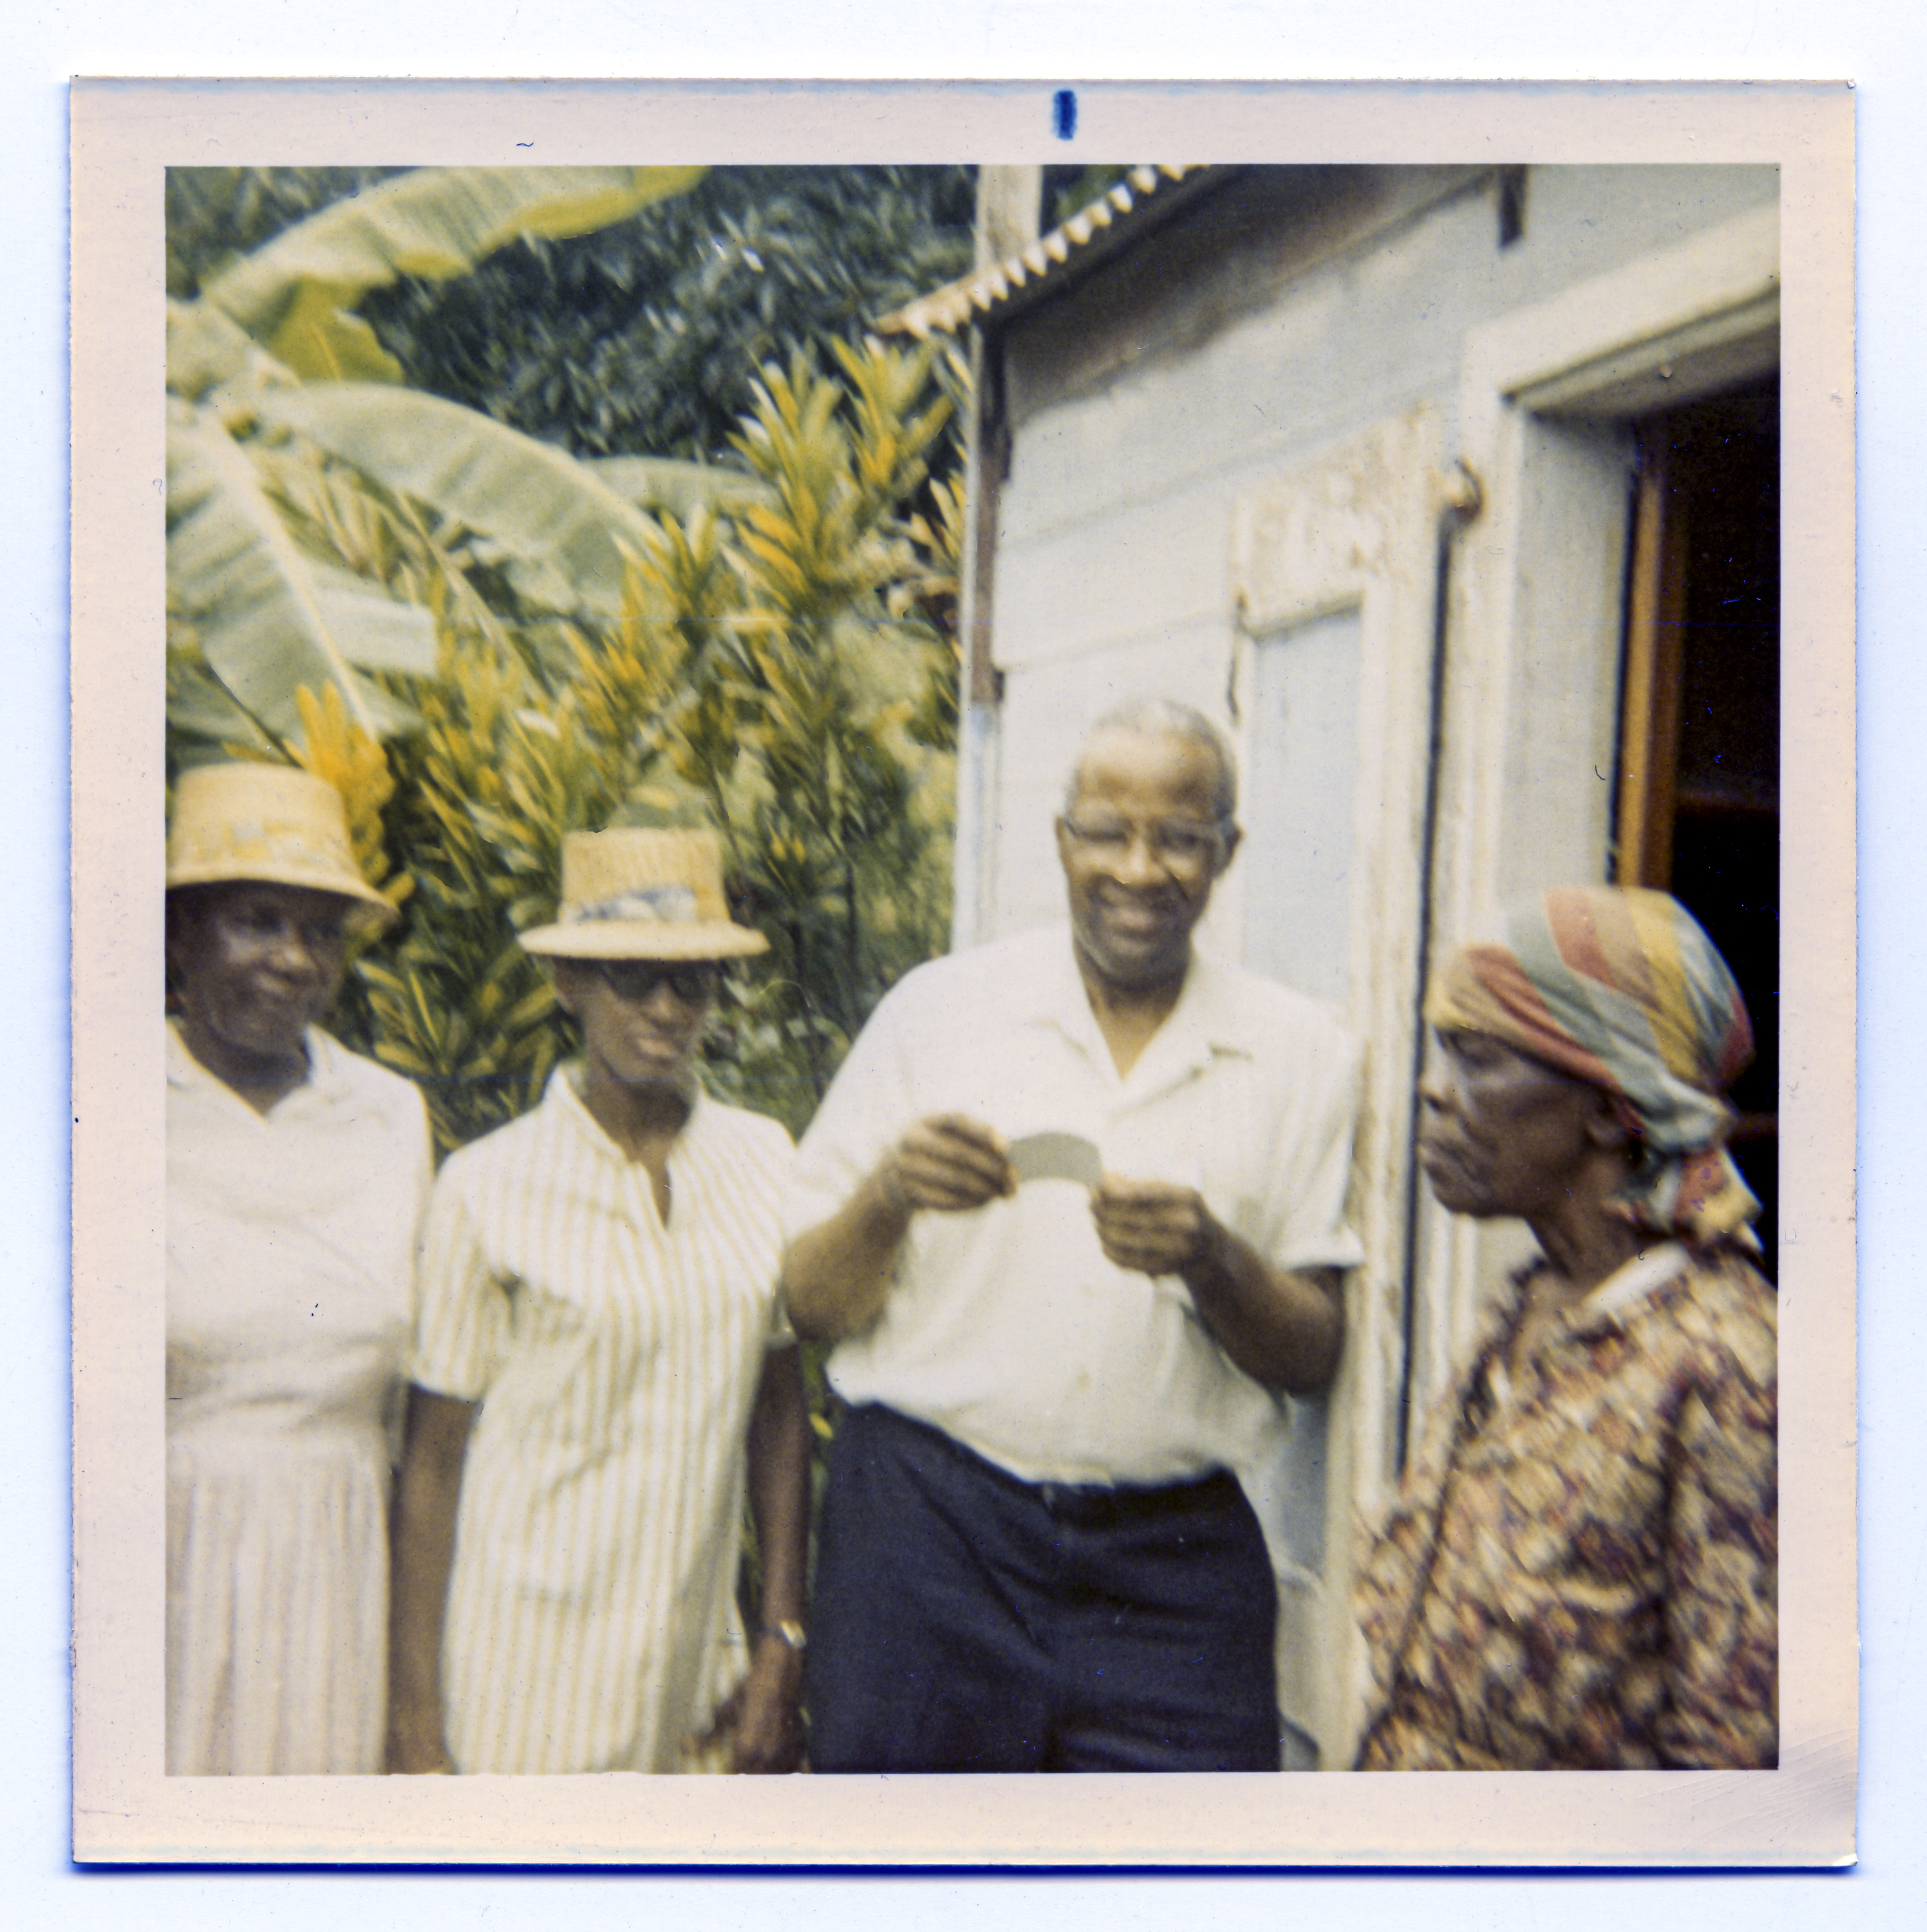 Aubrey (middle) and relatives in Montserrat, 1970s.